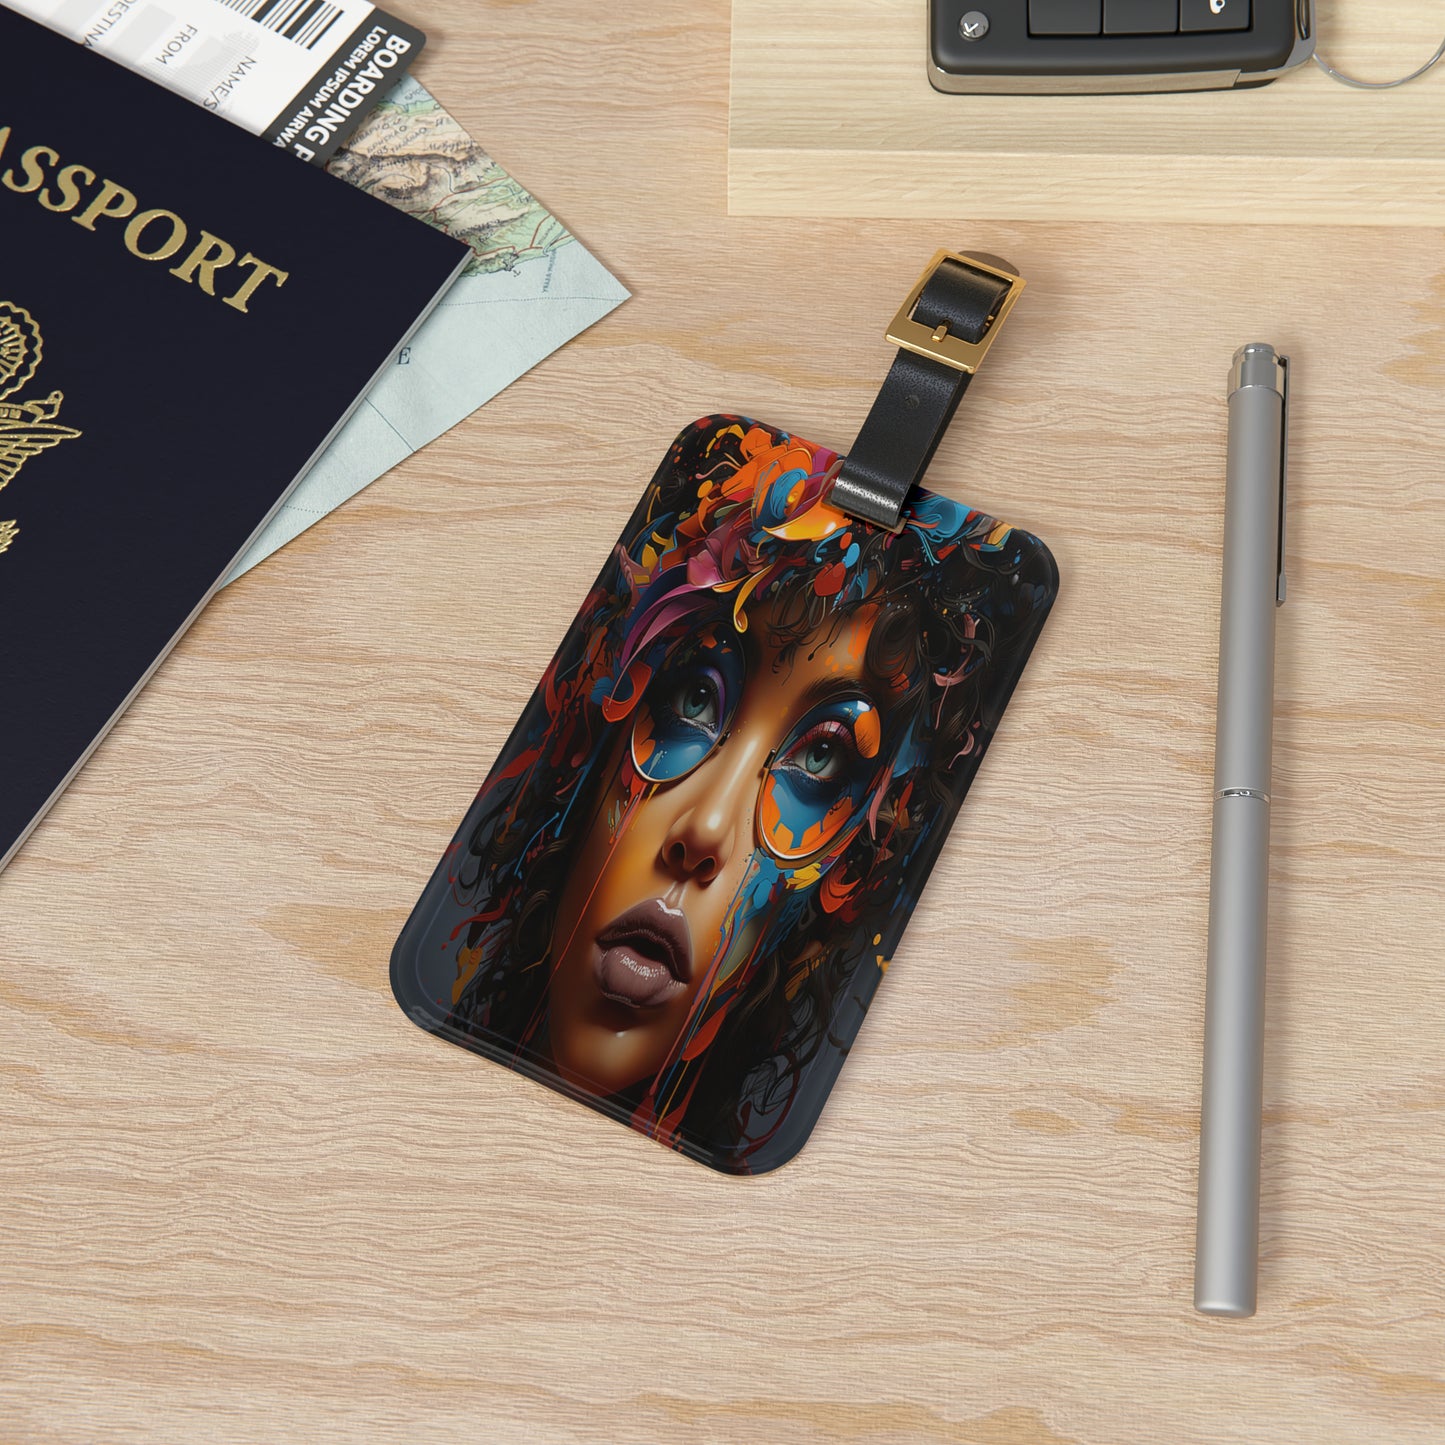 Artistic Odyssey Luggage Tag | Artistic Journey Collection | Christmas Vacation | Luggage Tags | Travel Tags